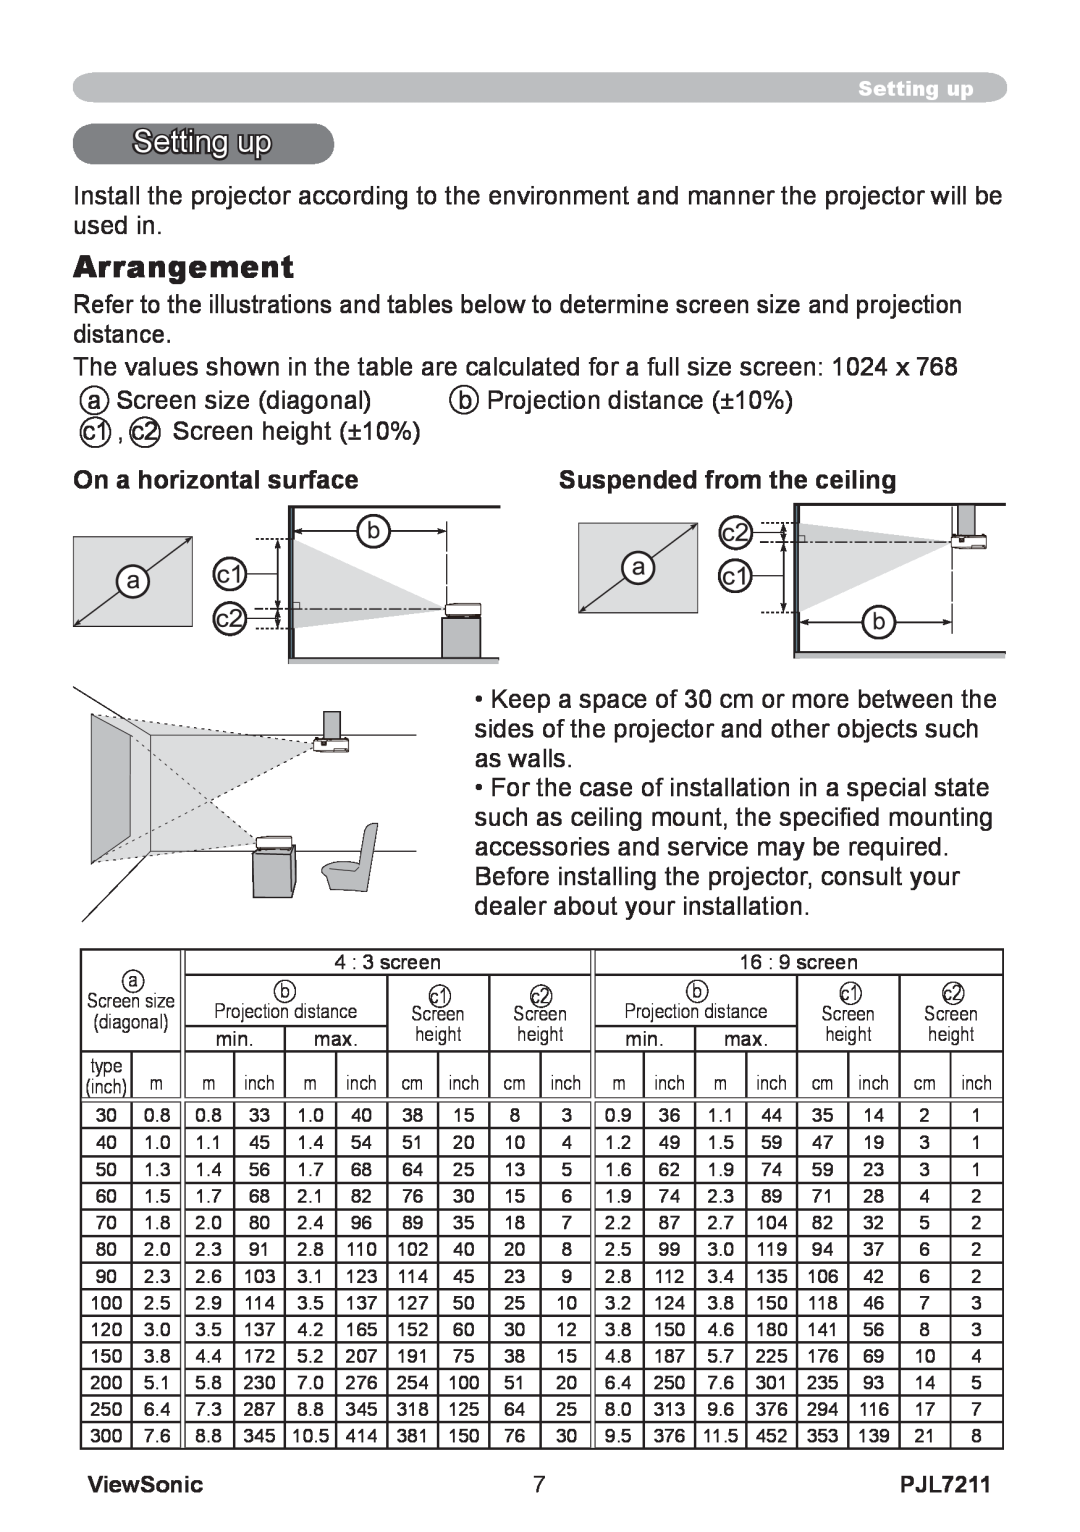 ViewSonic PJL7211 manual Setting up, Arrangement, On a horizontal surface, Suspended from the ceiling 